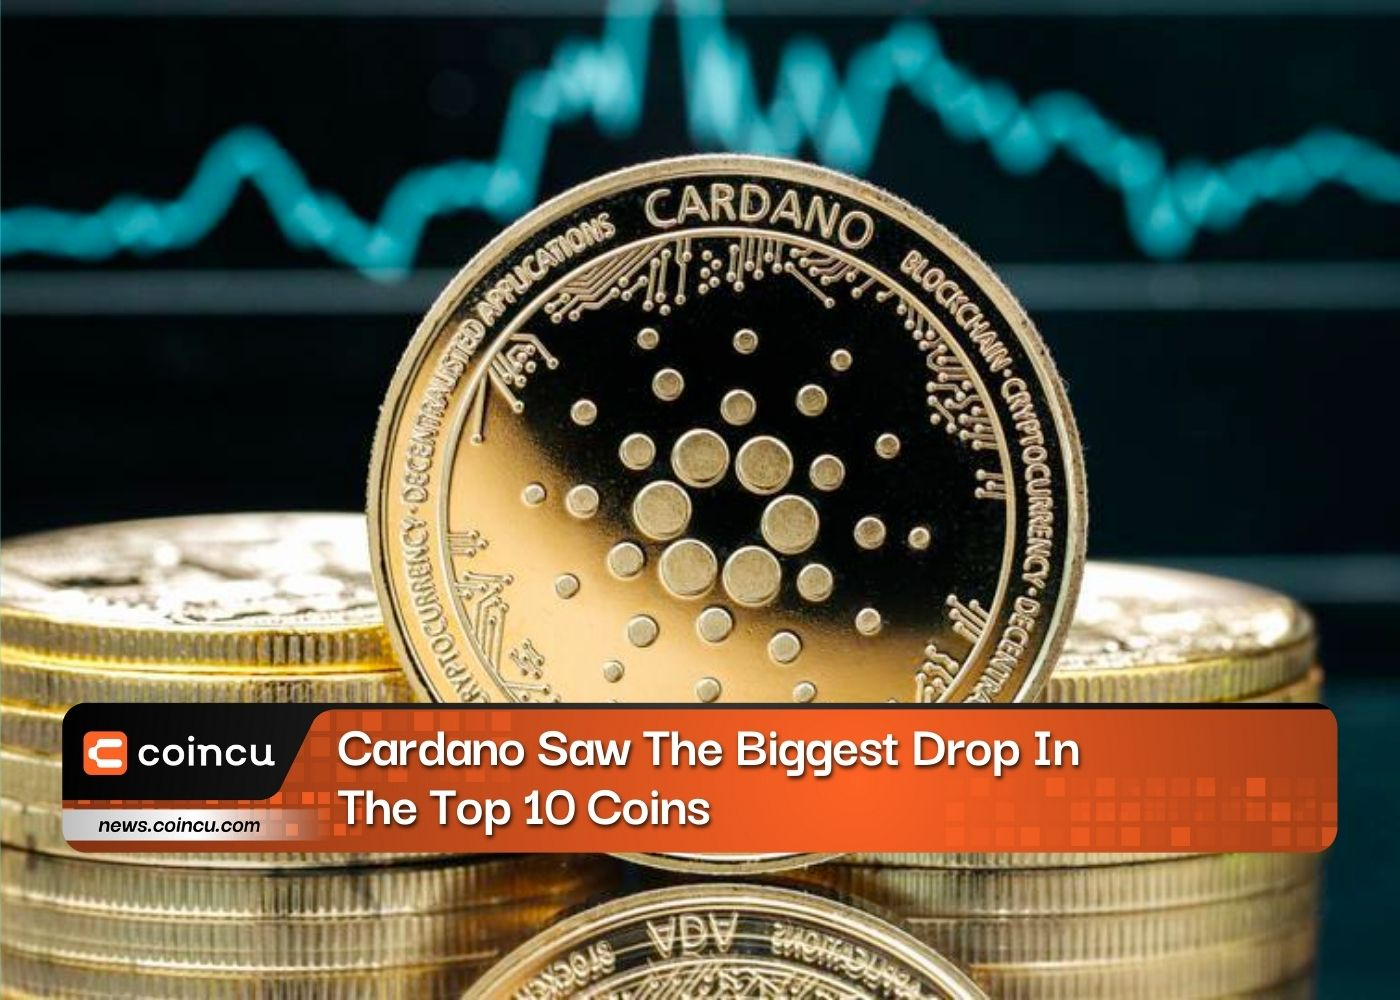 Cardano Saw The Biggest Drop In The Top 10 Coins - CoinCu News